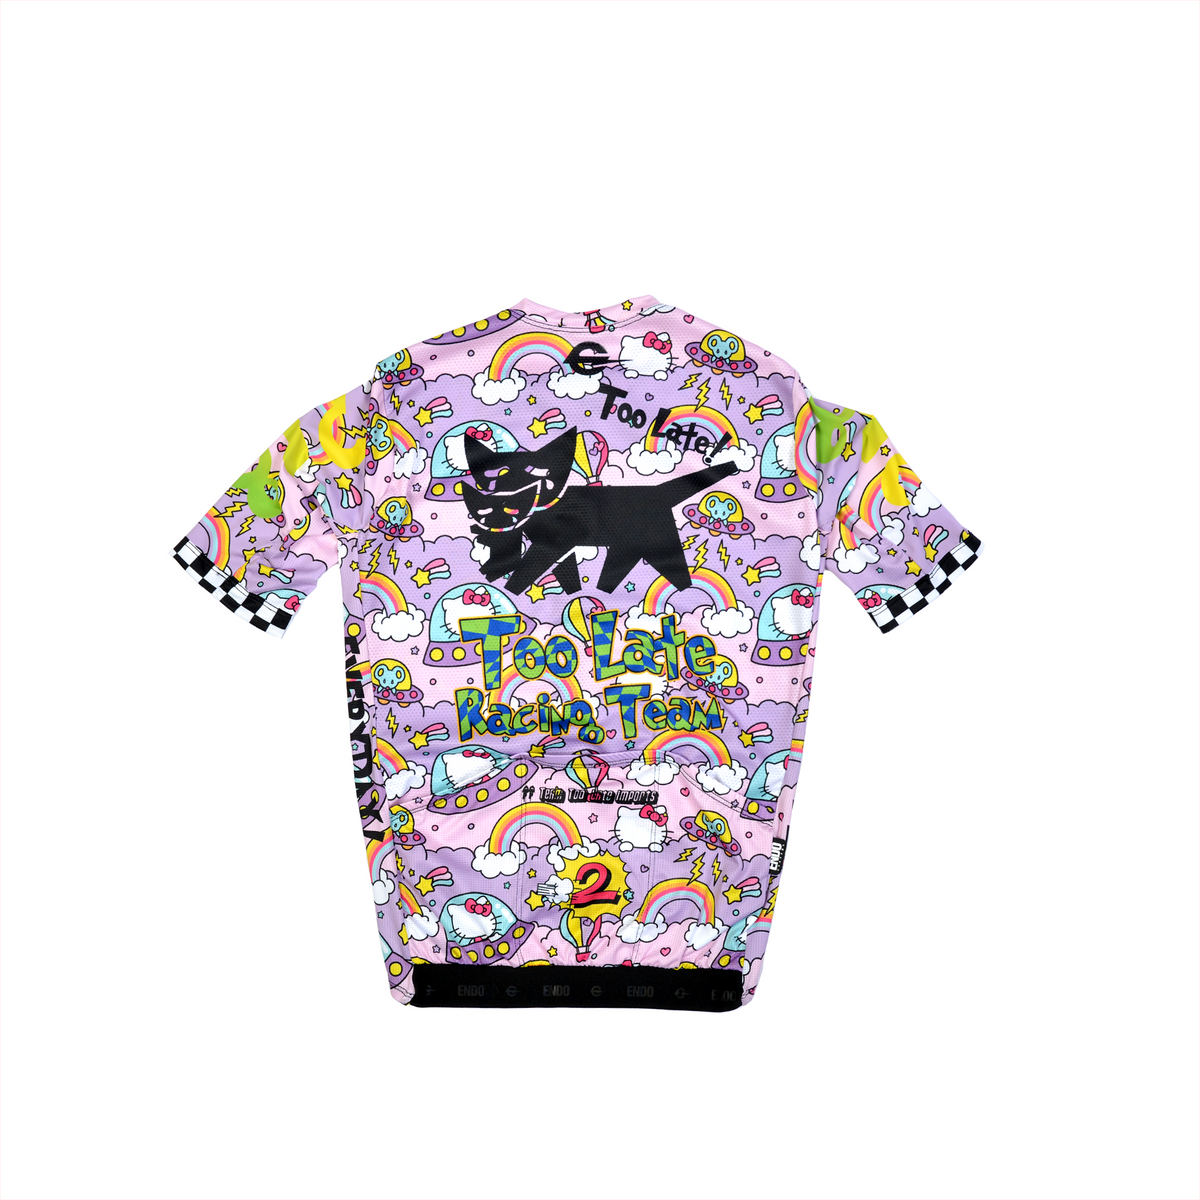 TEAM TOO LATE - LADERA JERSEY - MEOW